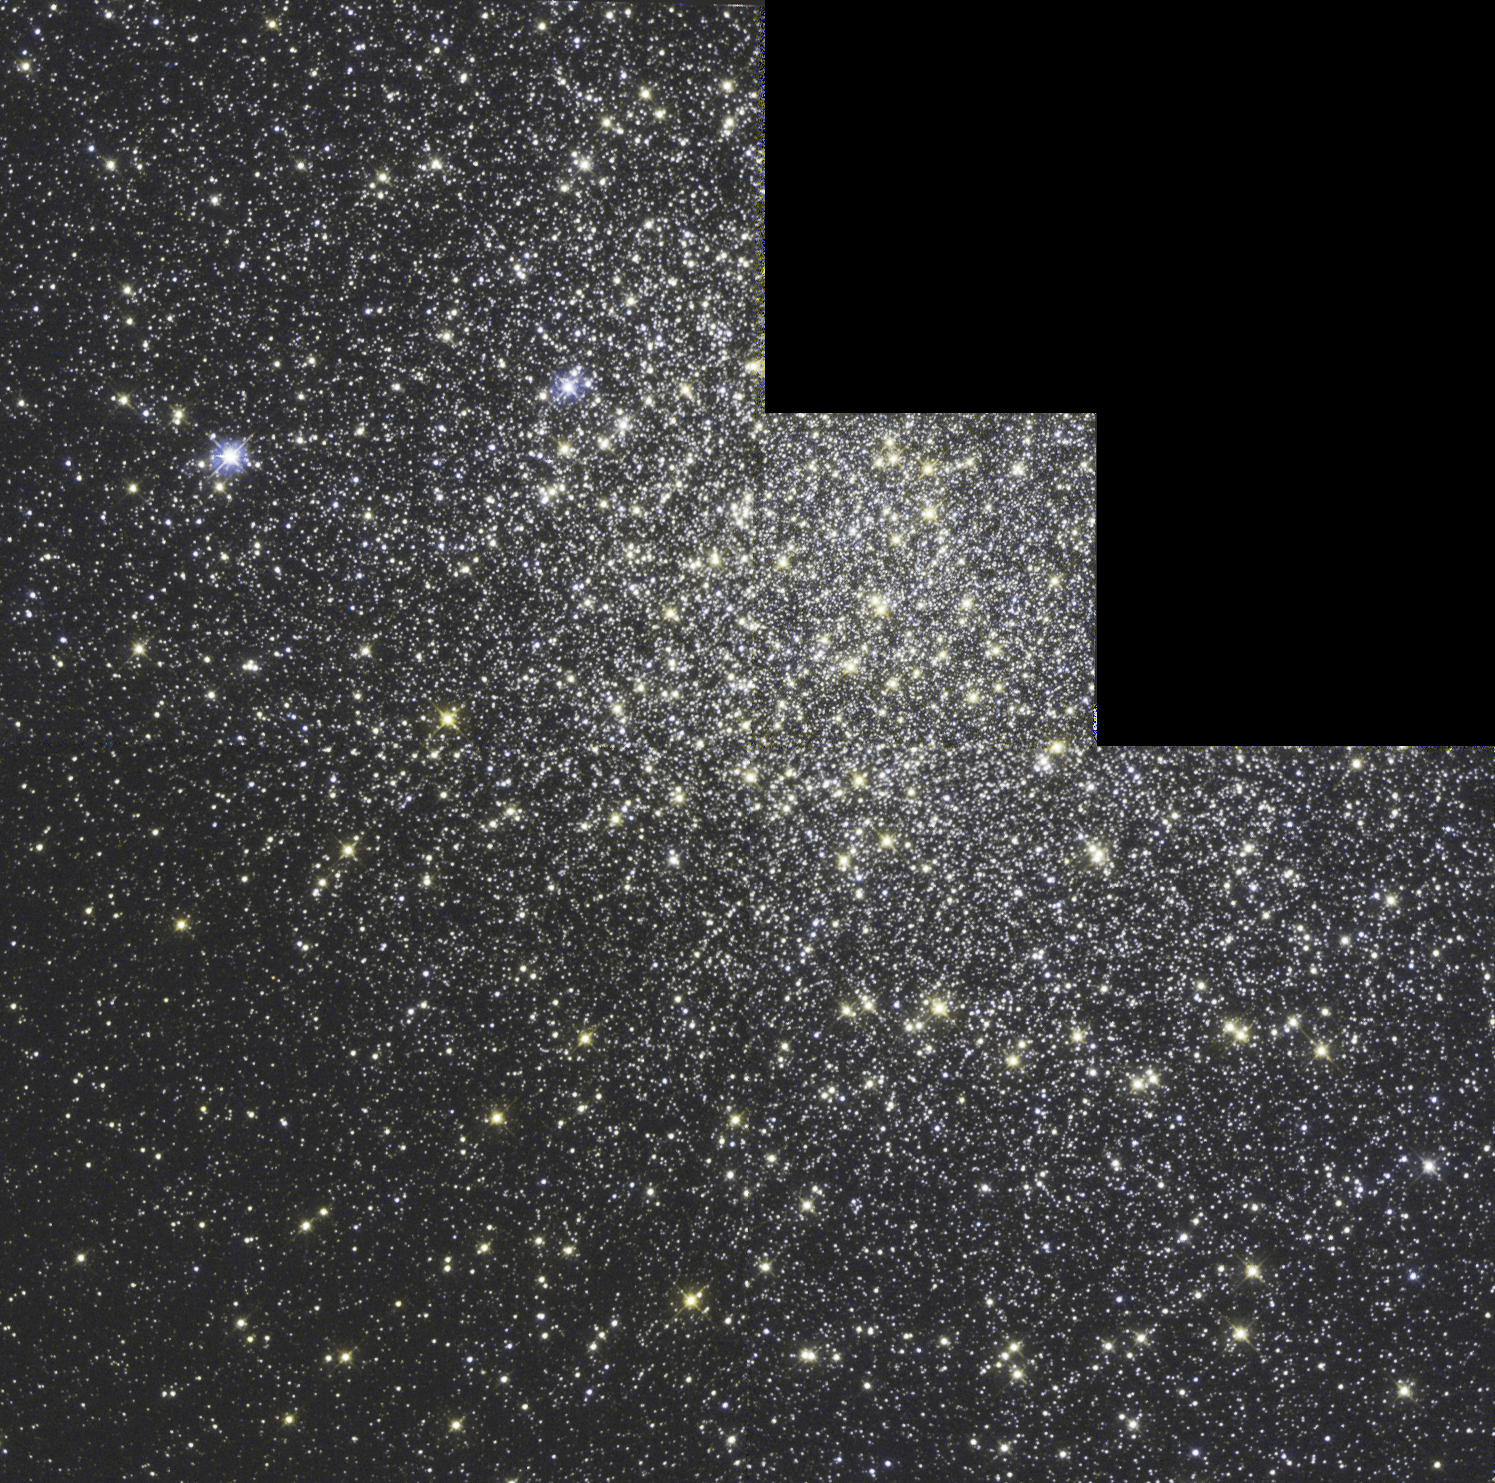 Hubble view of M19